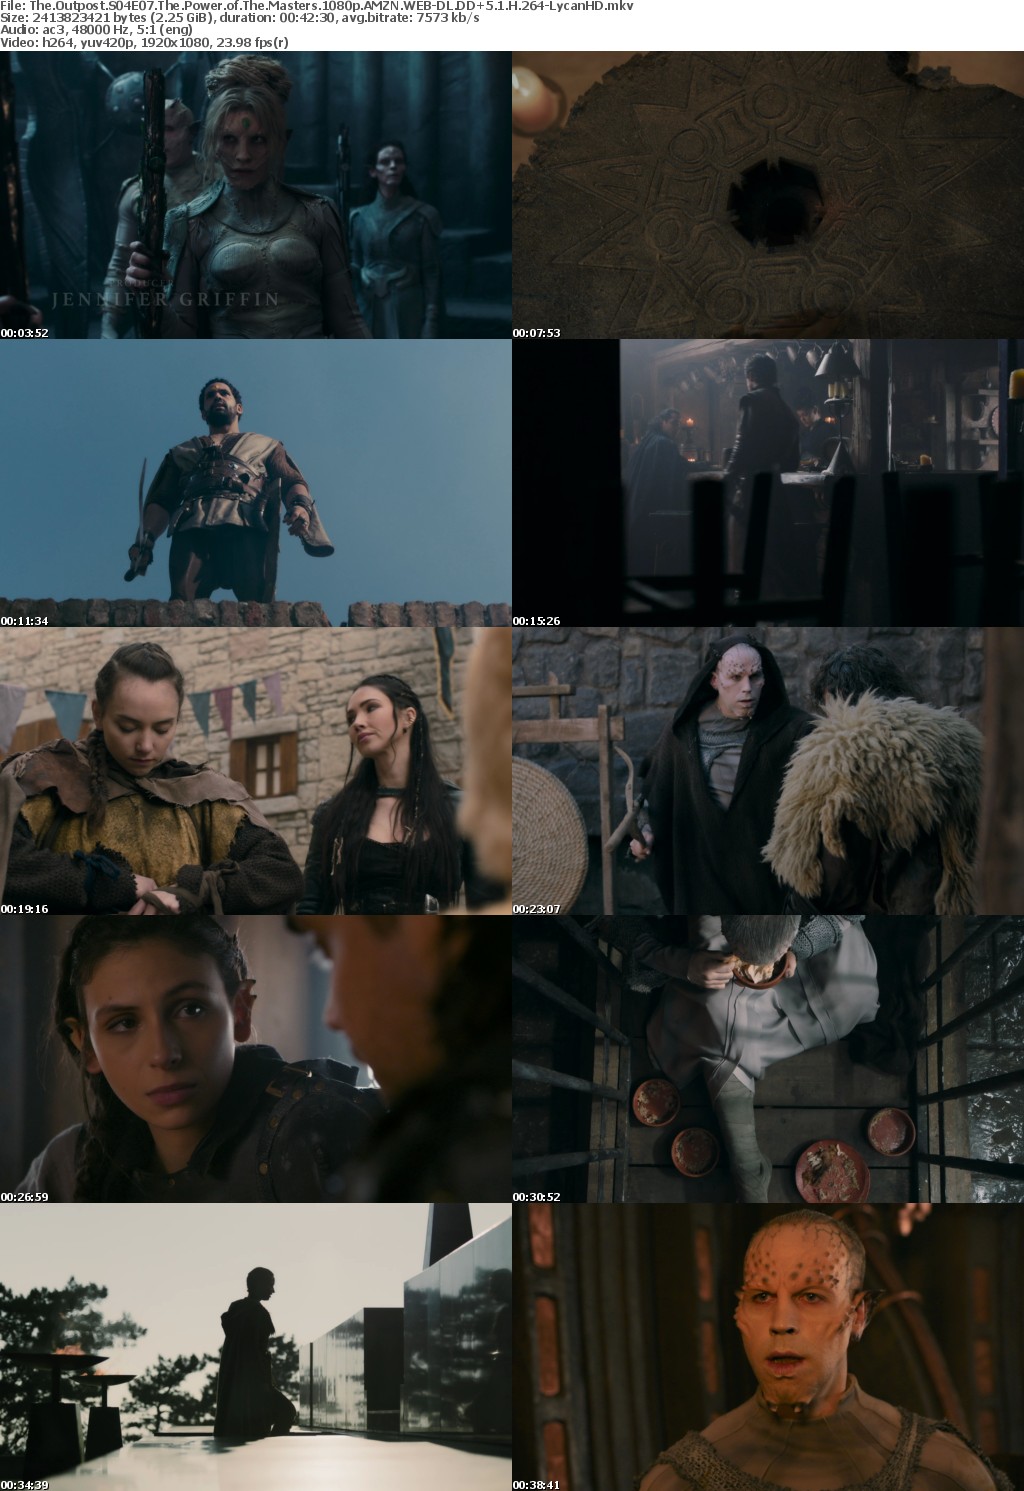 The Outpost S04E07 The Power of The Masters 1080p AMZN WEBRip DDP5 1 x264-LycanHD